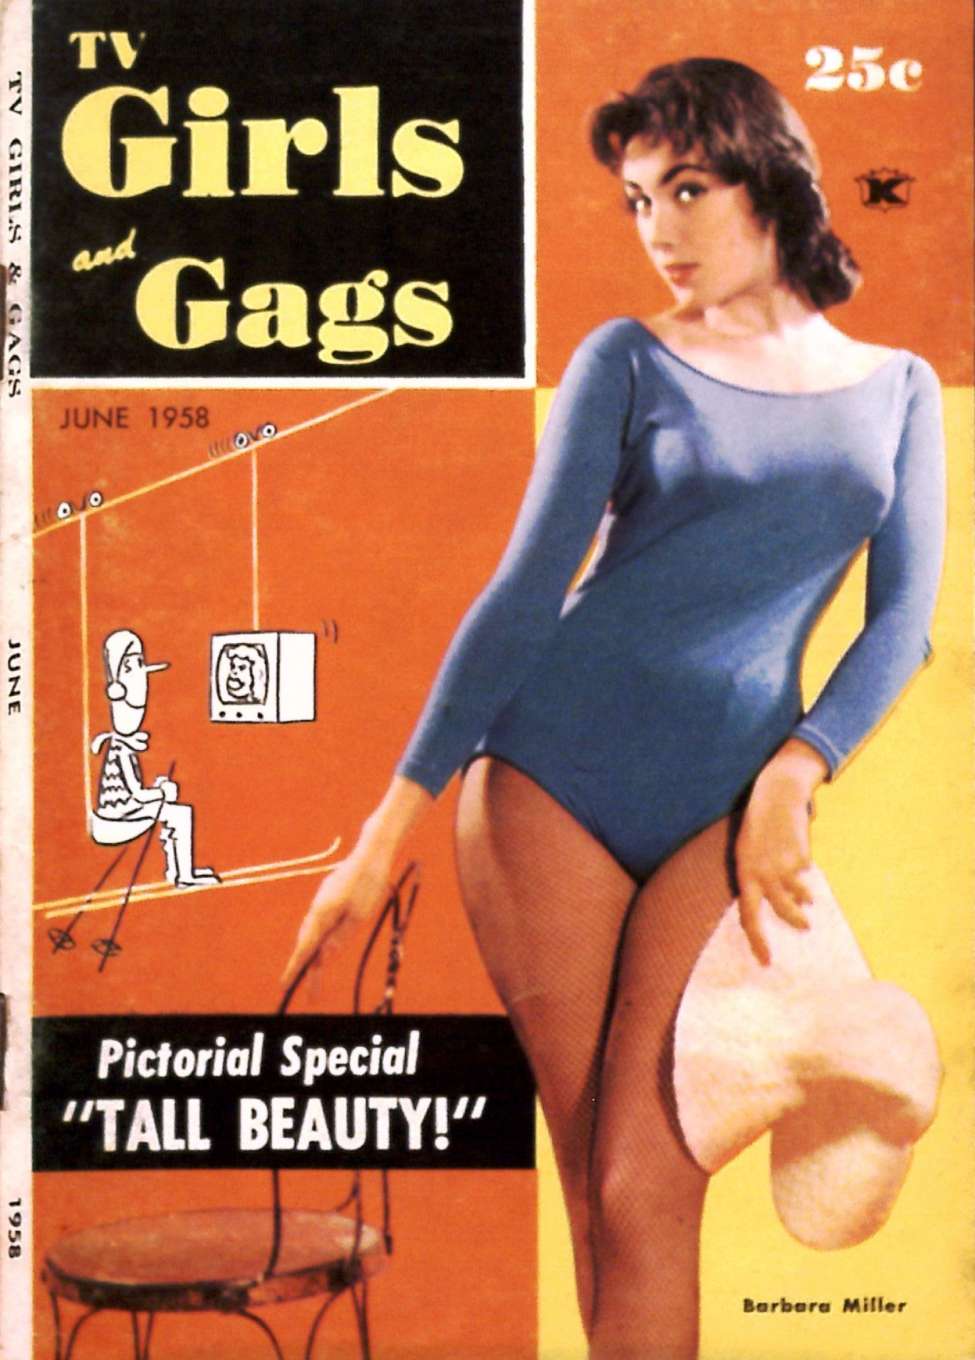 Book Cover For TV Girls and Gags v5 2